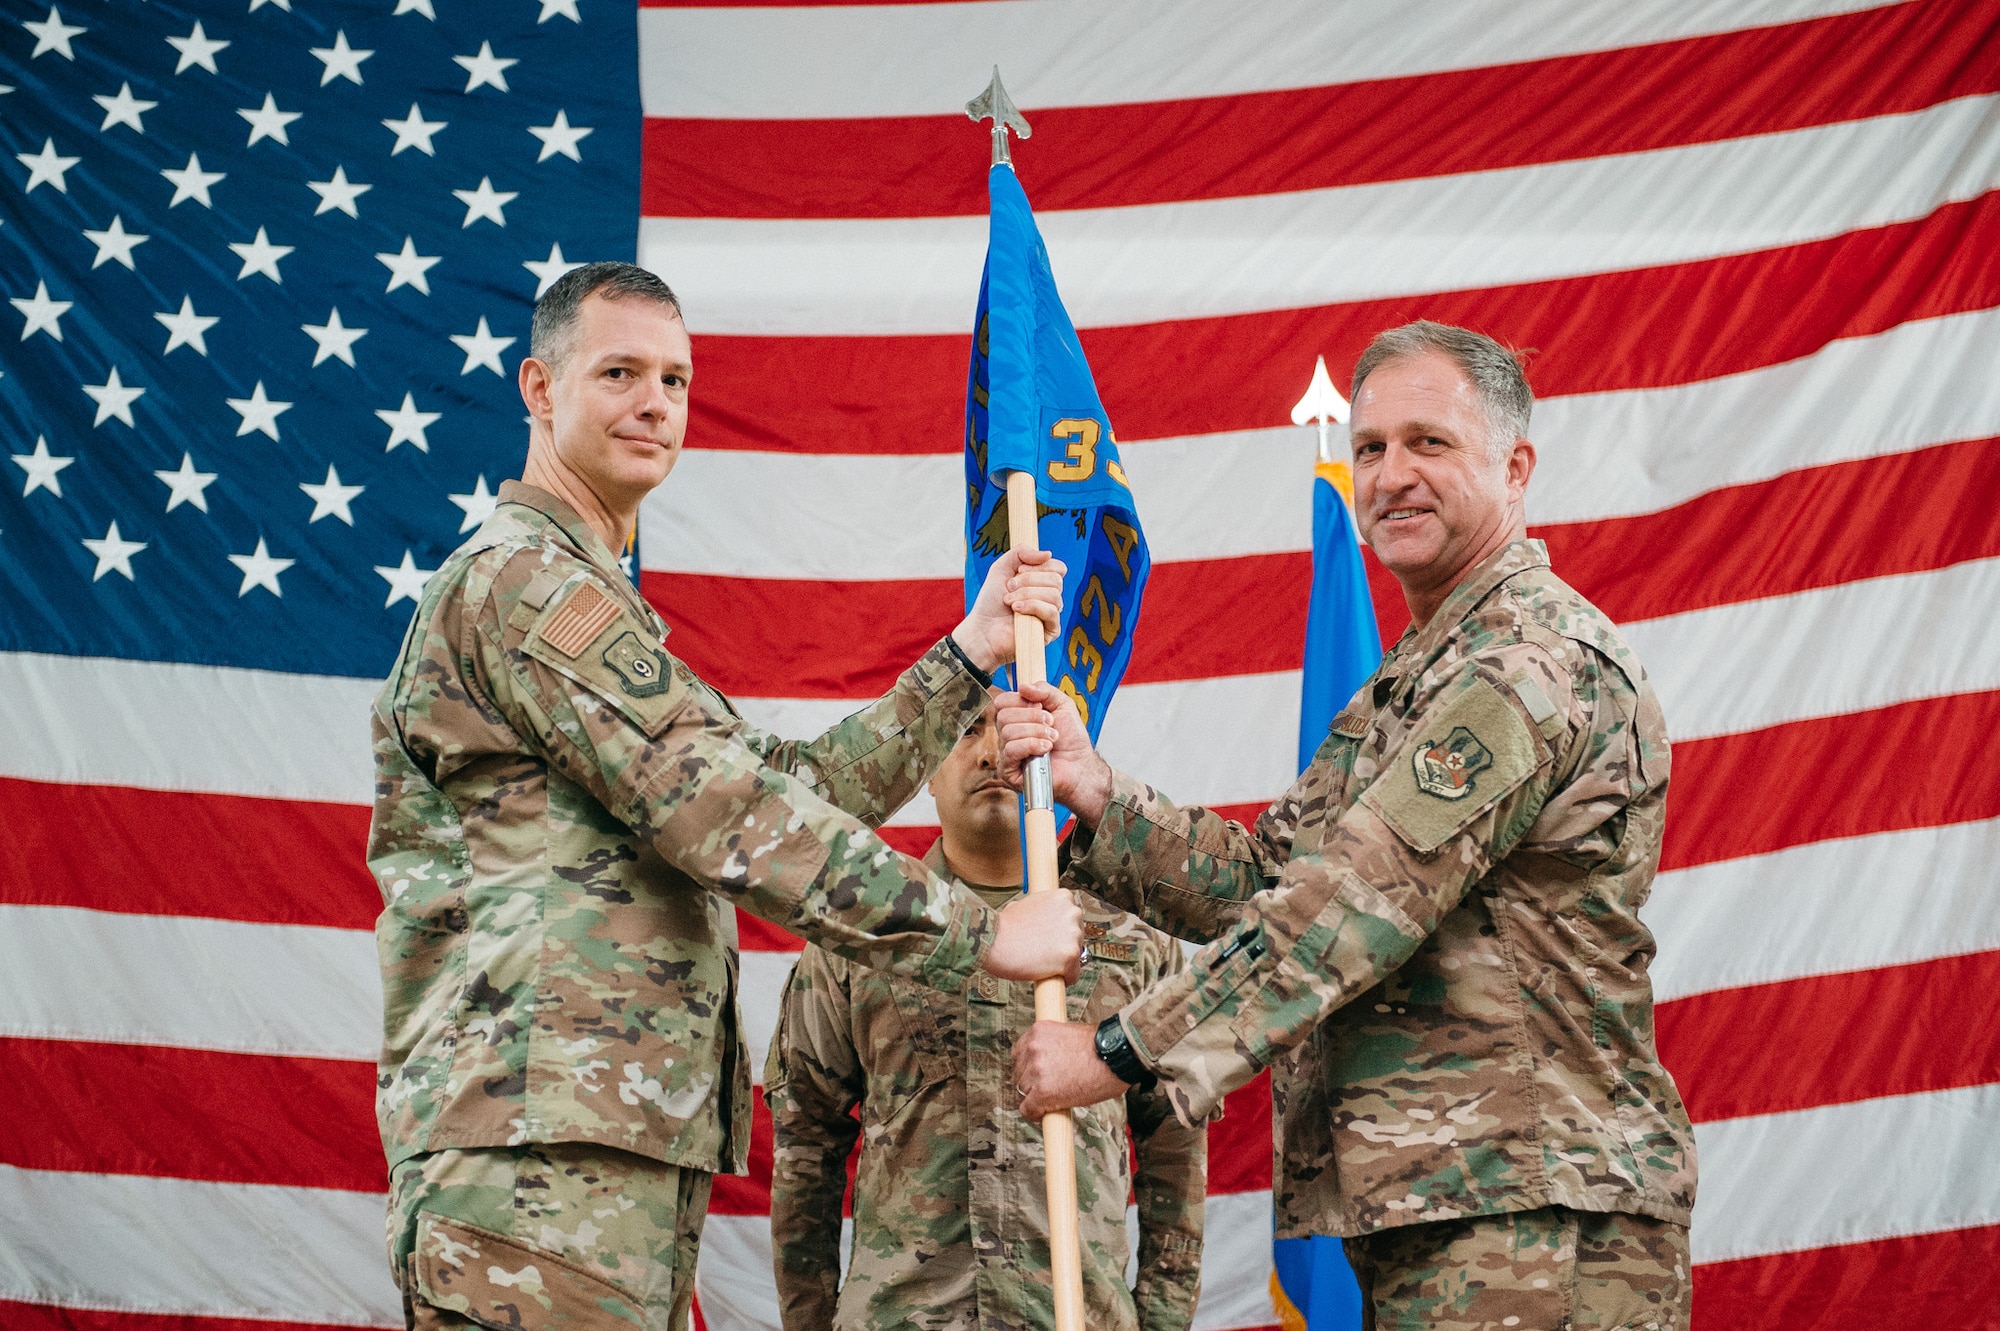 Brig. Gen. Mark Slocum, right, accepts command of the 332nd Air Expeditionary Wing from Maj. Gen. Alexus Grynkewich, 9th Air Expeditionary Task Force-Levant commander, during a change of command ceremony in Southwest Asia, June 20, 2019.